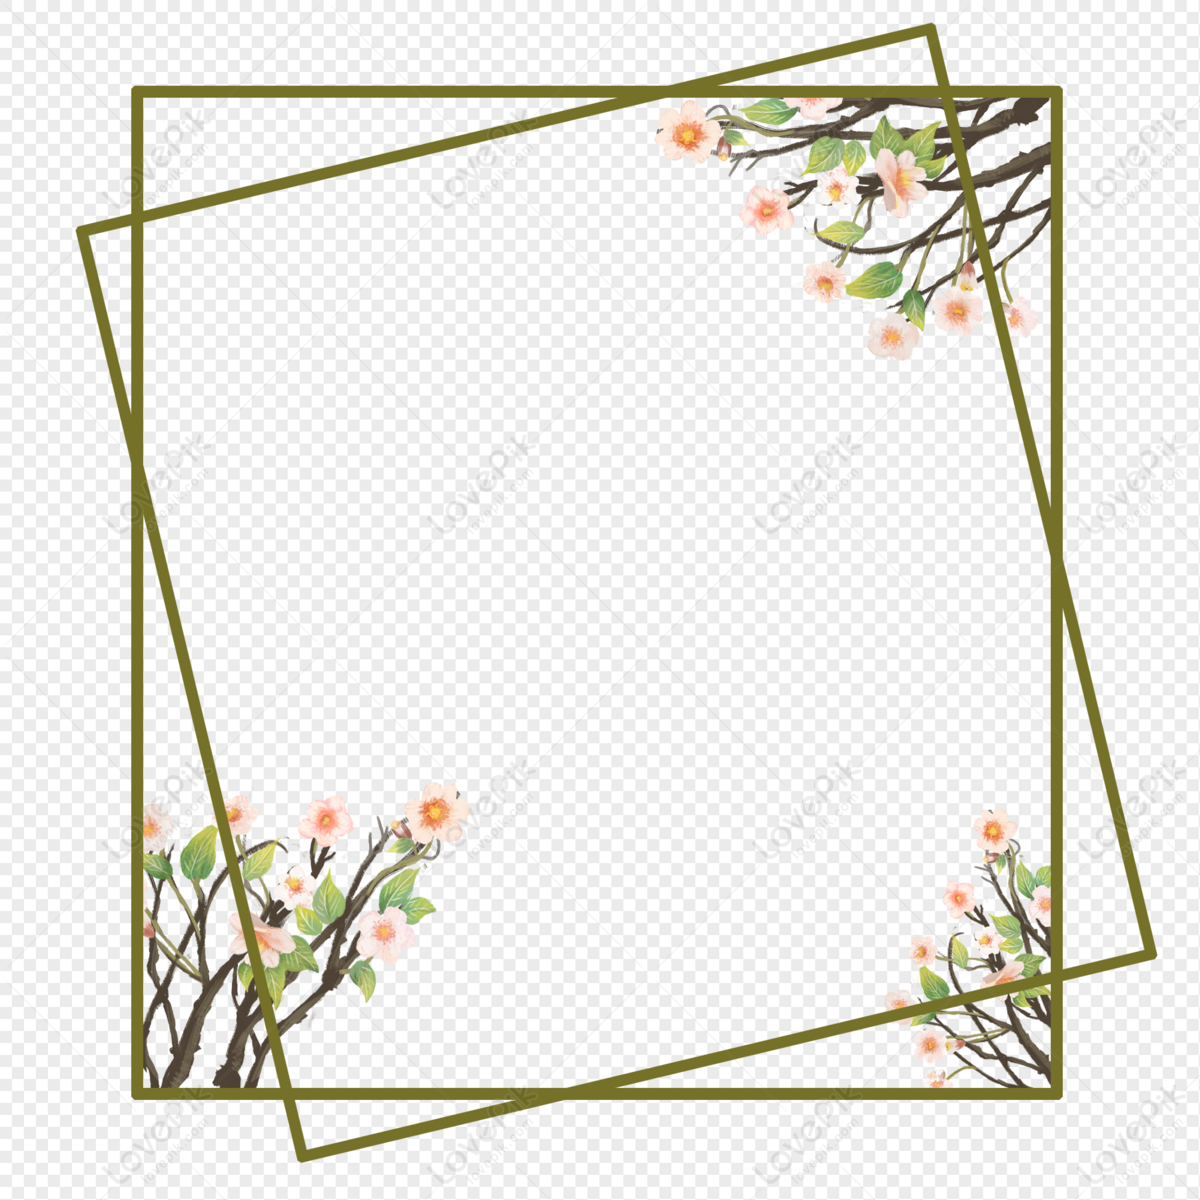 Flower Border PNG Transparent Background And Clipart Image For Free  Download - Lovepik | 401077790